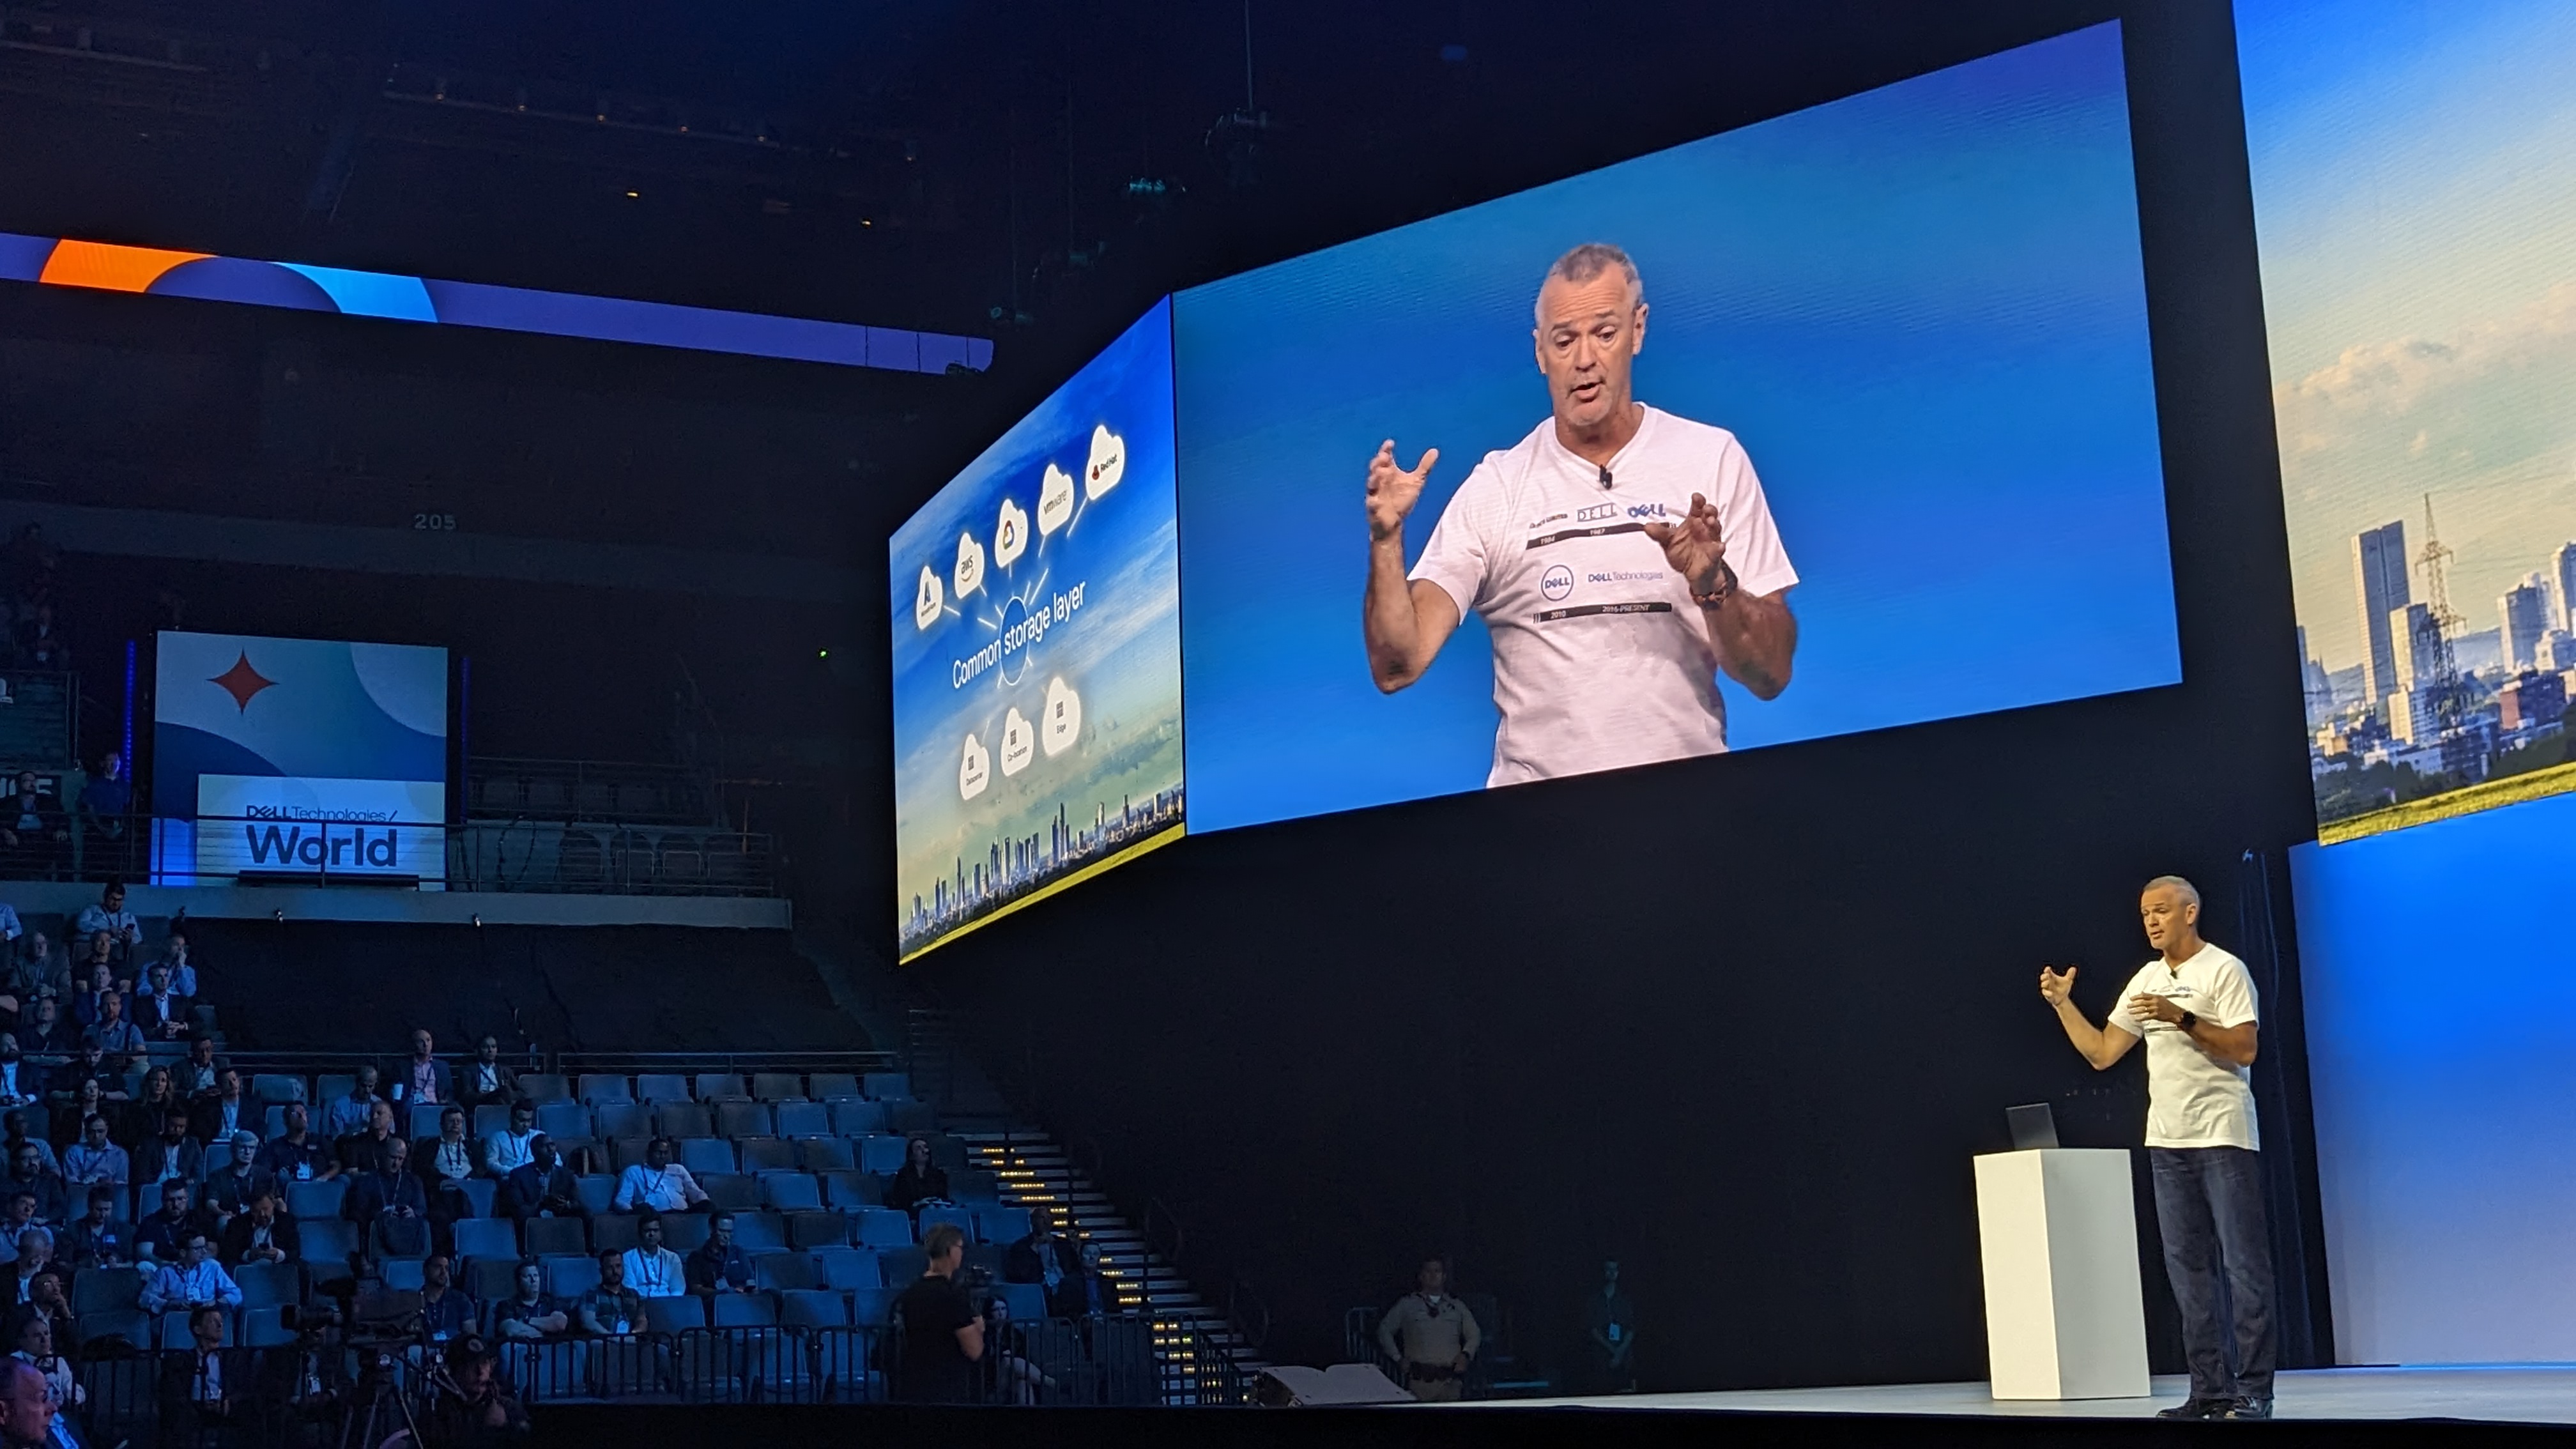 Dell's Jeff Clarke standing on stage, gesturing as a cloud diagram is shown on a screen above him.